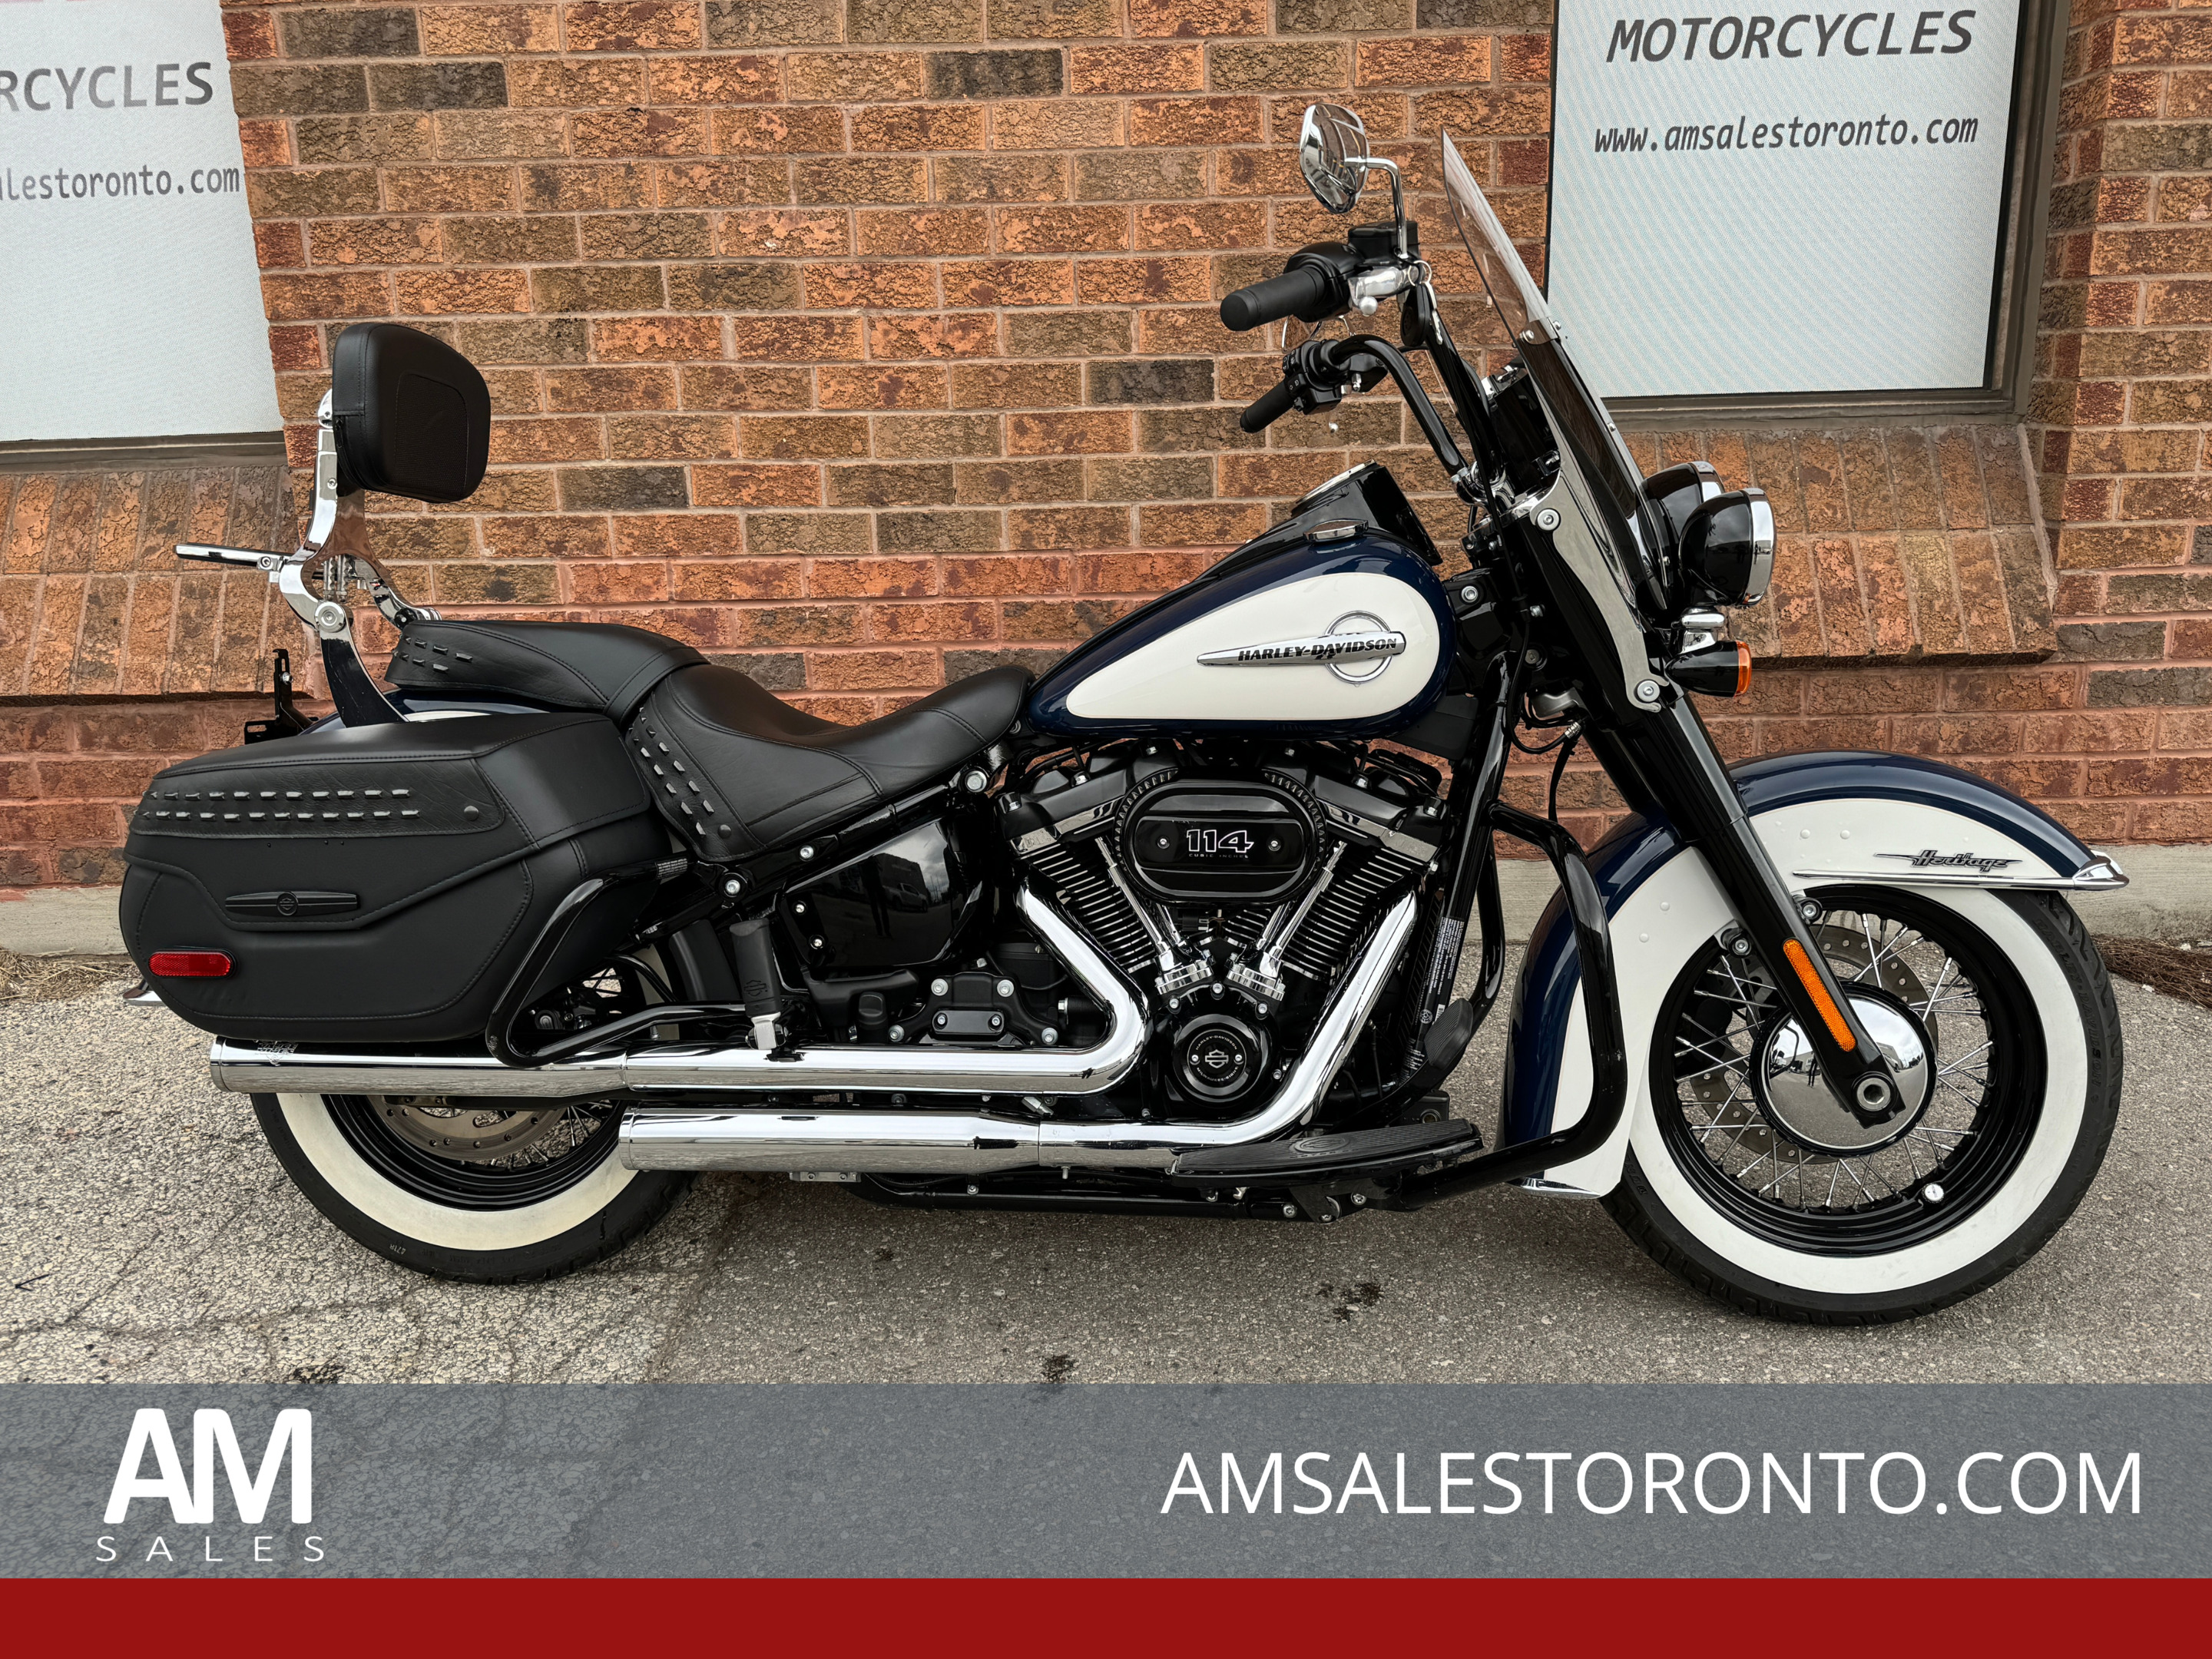 2019 Harley-Davidson Heritage Softail Classic 114 **CANADIAN BIKE** **VANCE & HINES PIPES**